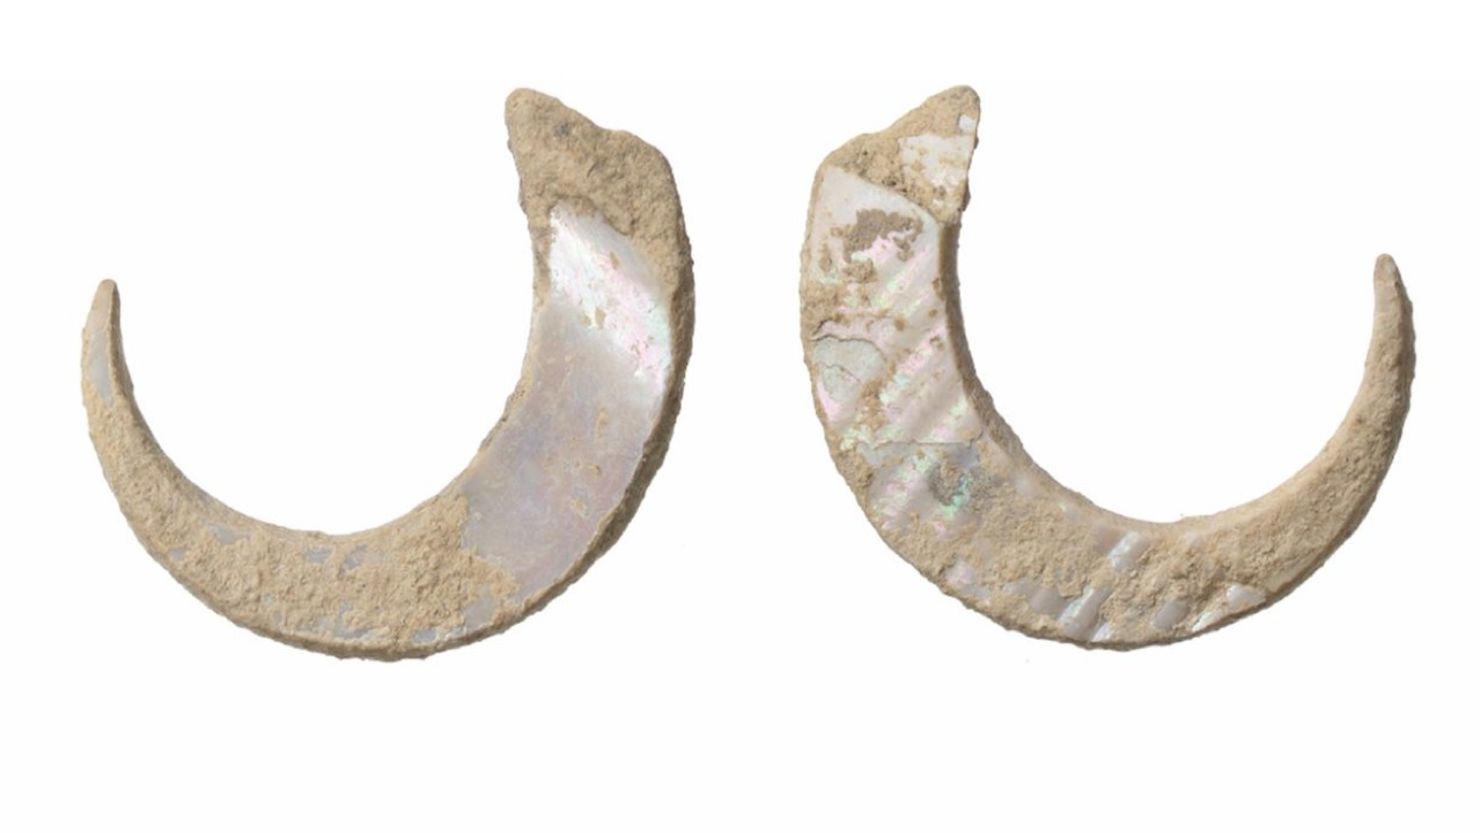 World's oldest fish hooks found in Japan